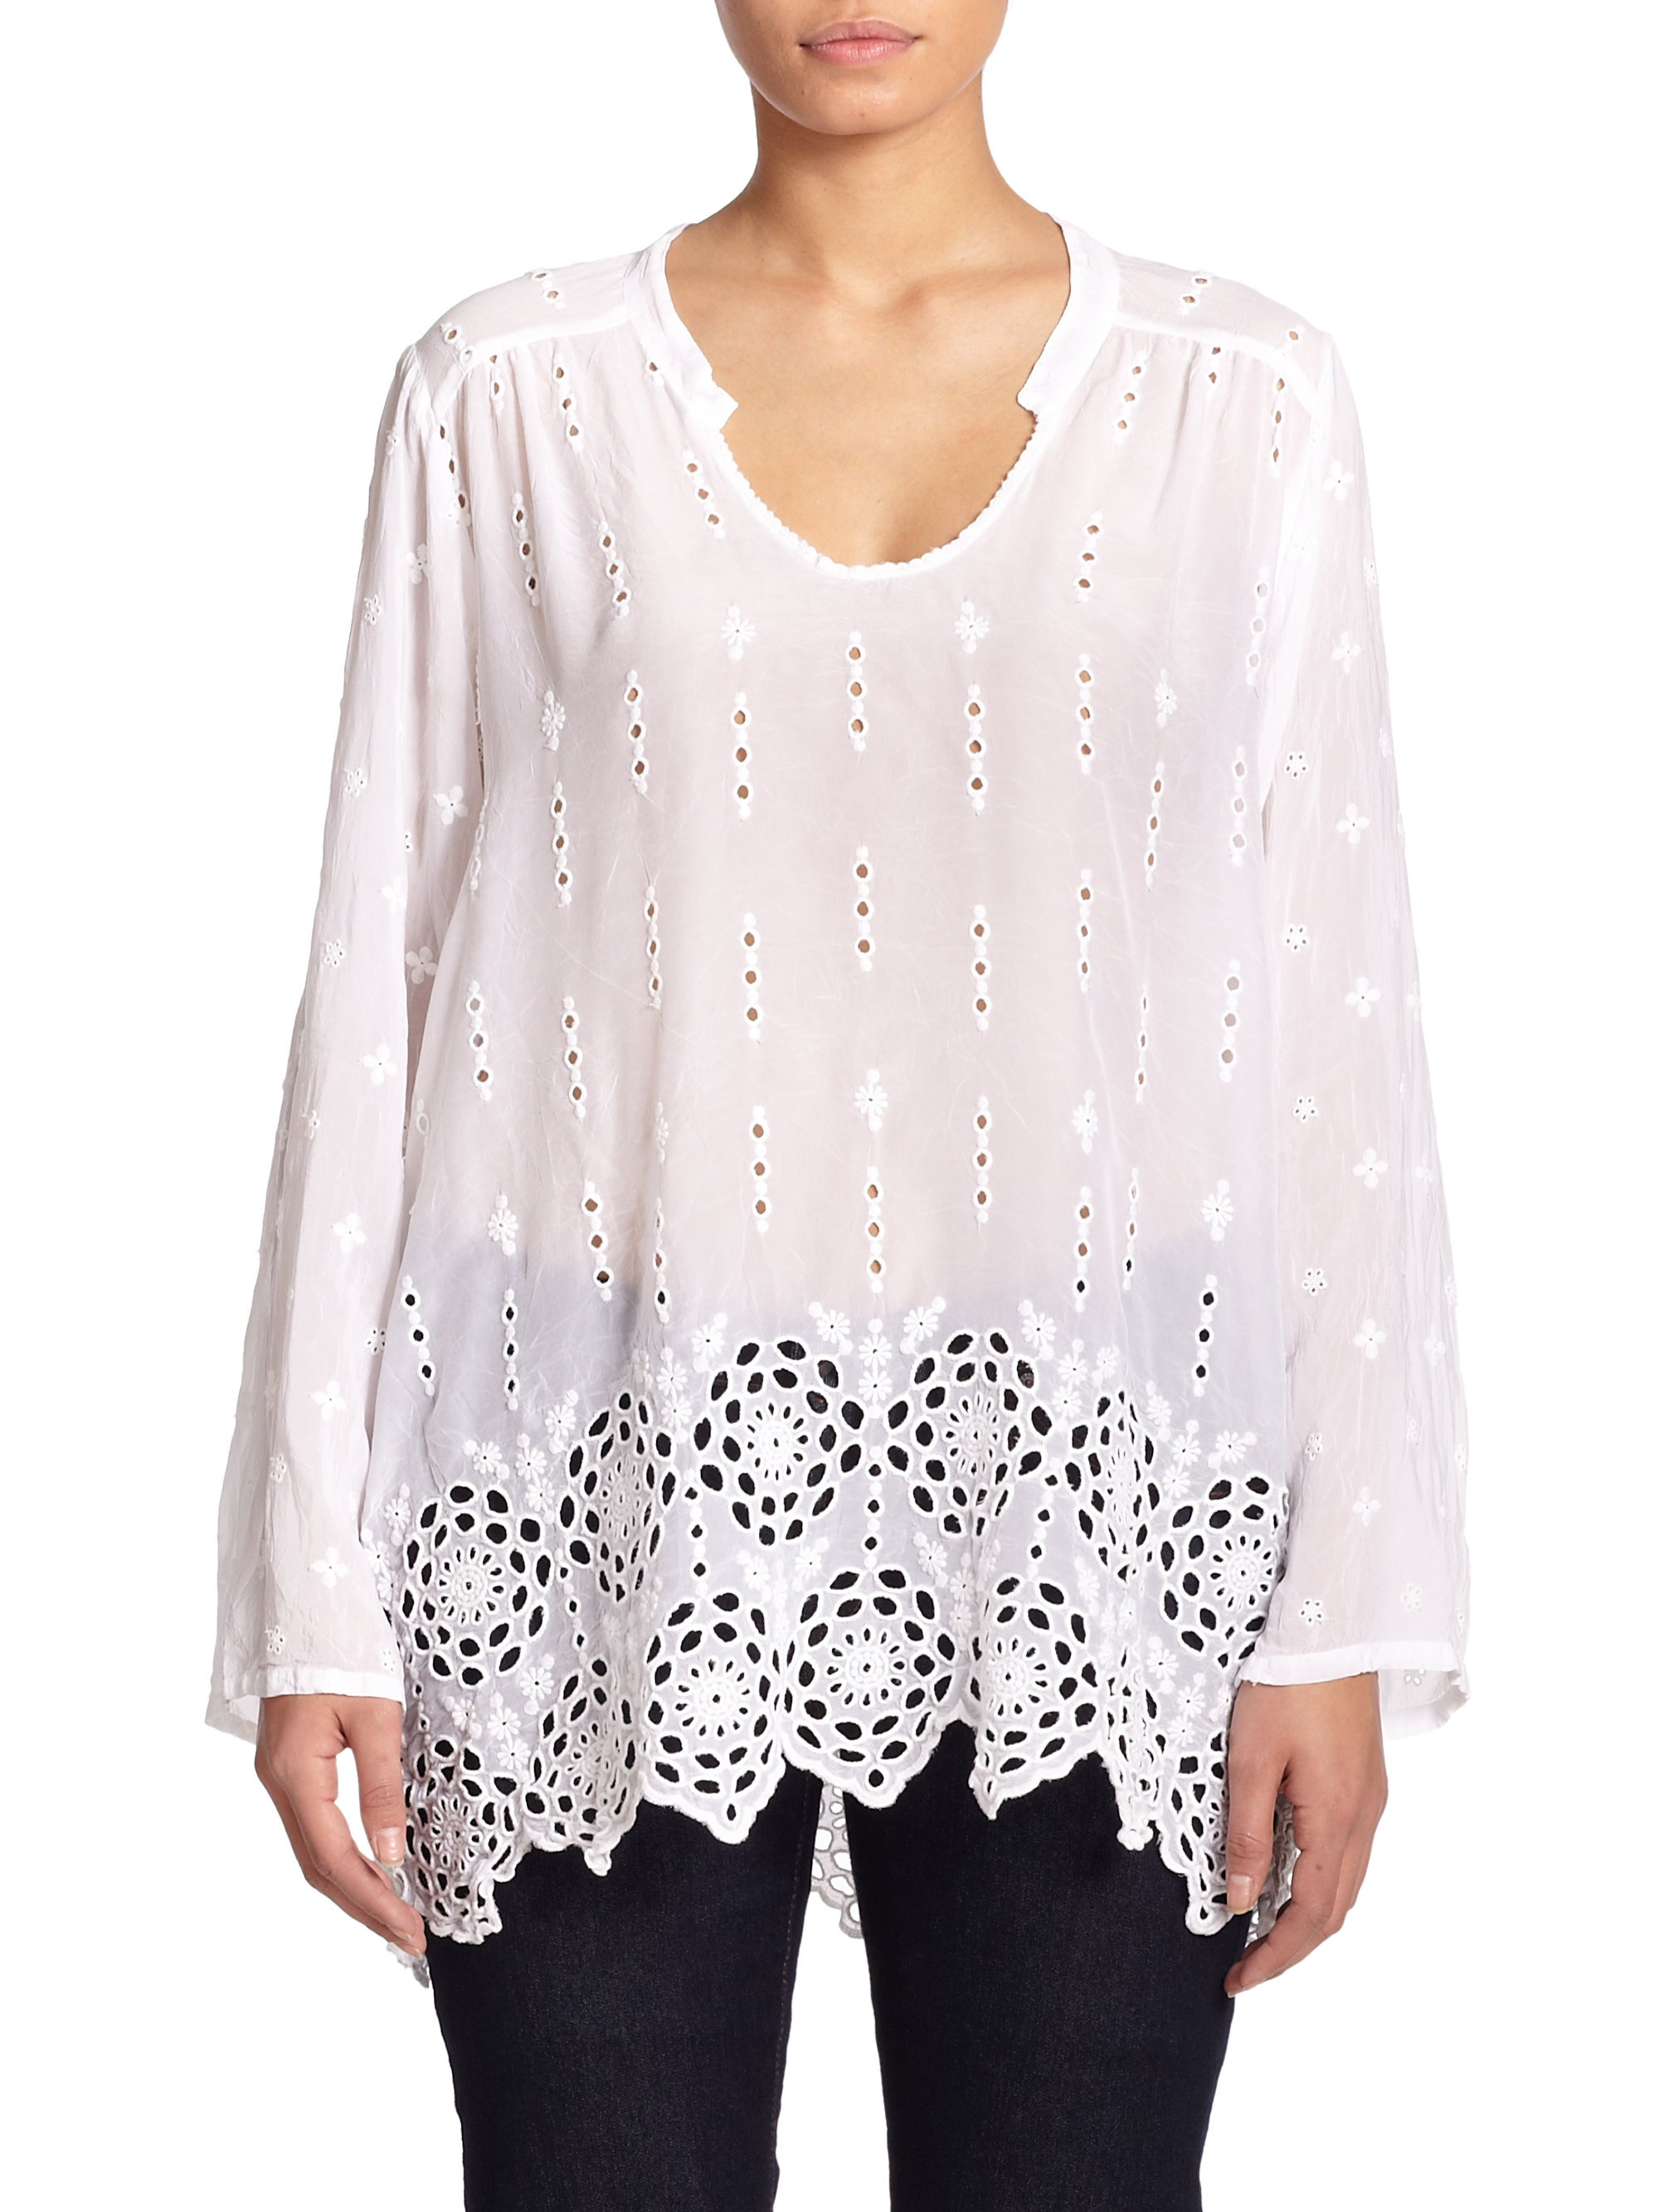 Lyst - Johnny Was Eyelet Top in White